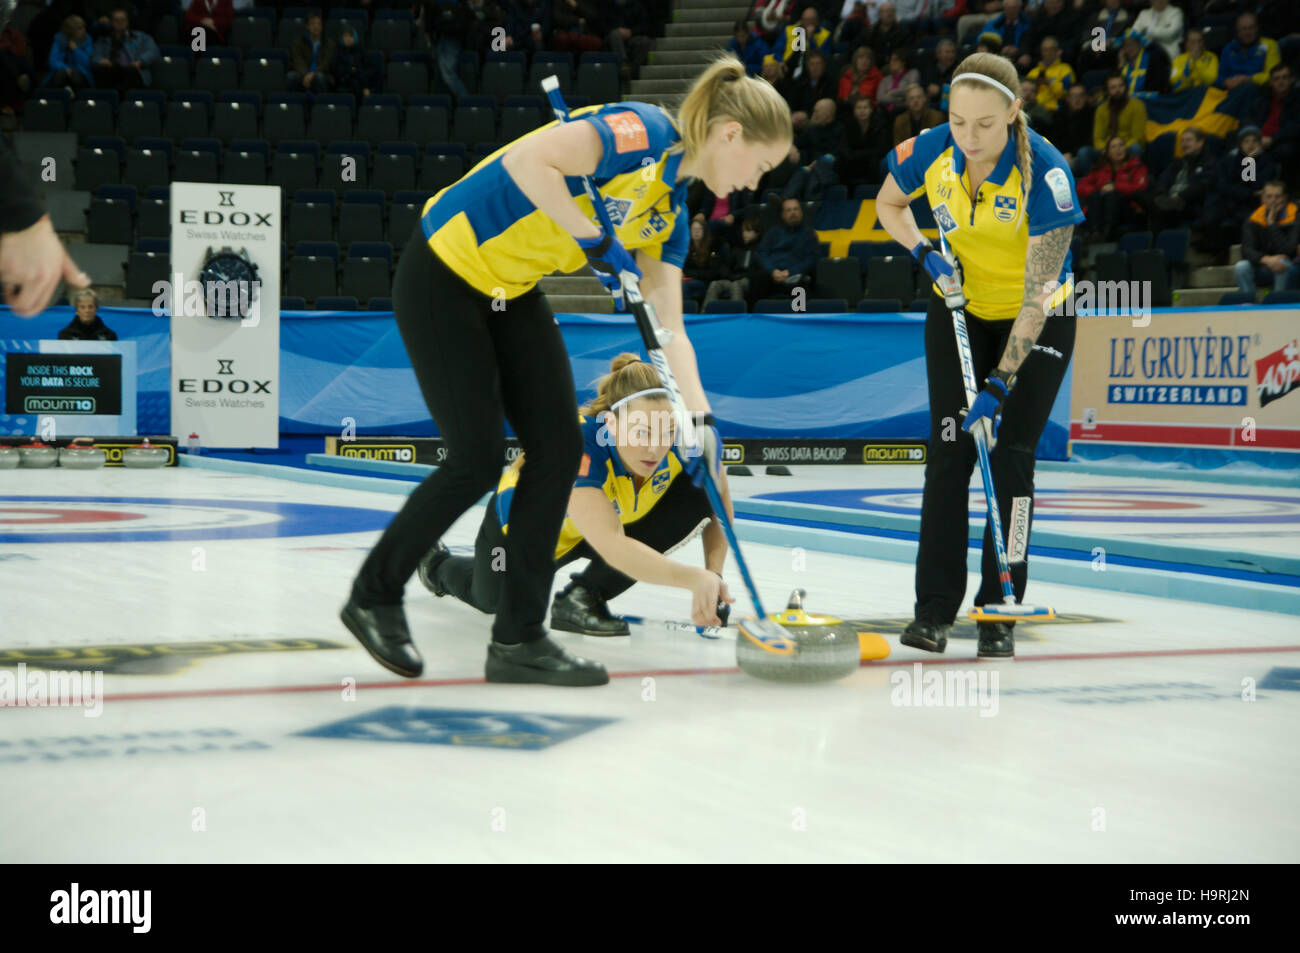 Braehead Arena, Renfrewshire, Scotland, 26 November 2016. Agnes Knochenhauer of Sweden delivering a stone during their match against Russia in the final of the Le Gruyère AOP European Curling Championships 2016. It is being swept by Sara McManus and Sofia Mabergs.  Credit:  Colin Edwards / Alamy Live News Stock Photo